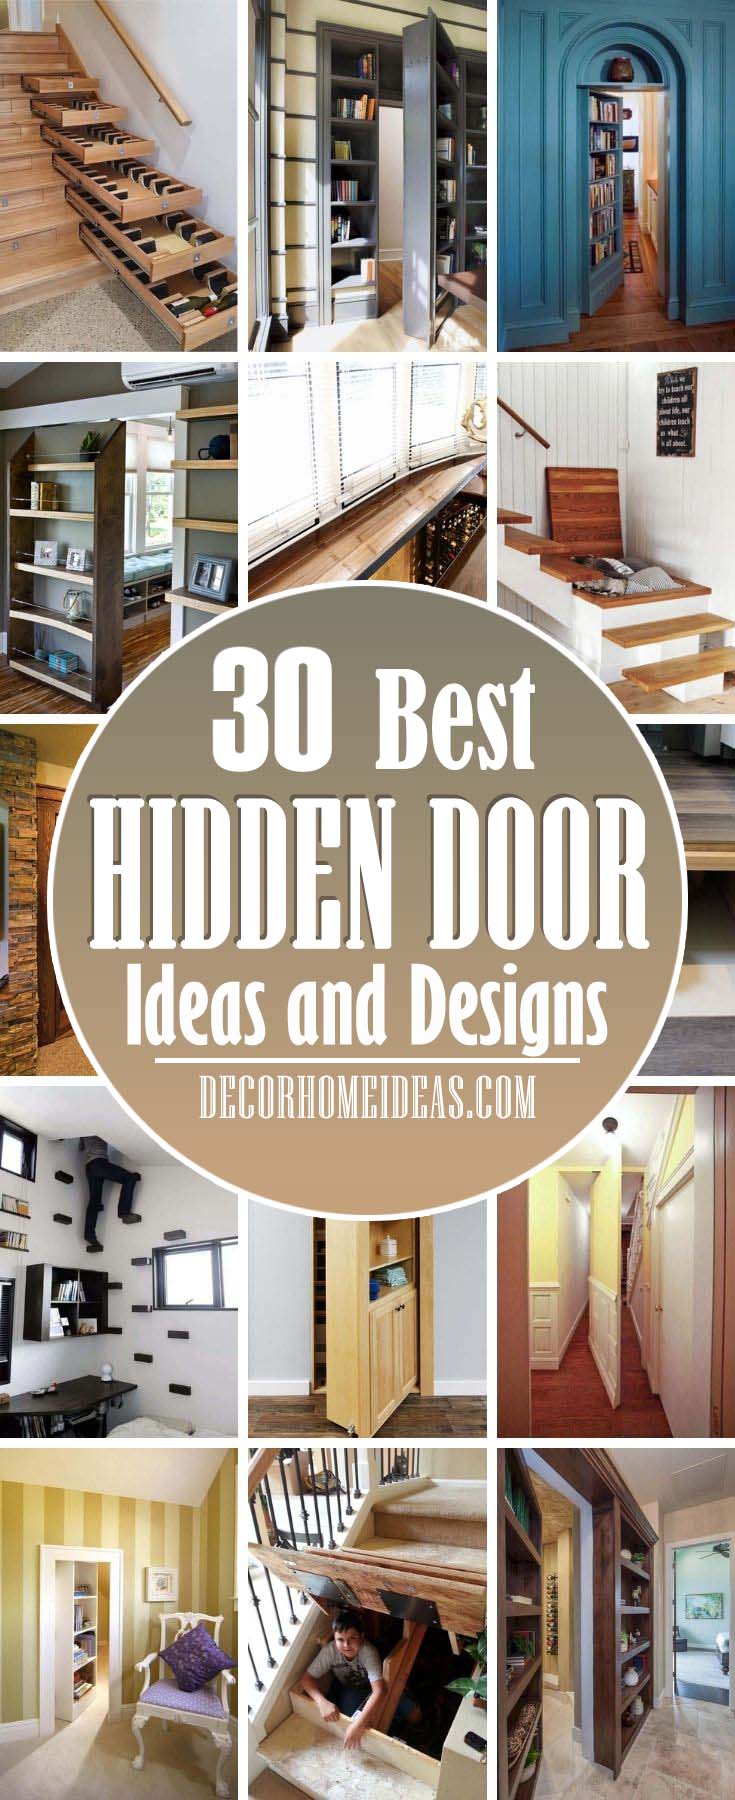 30 Clever Door Ideas That Are, How To Build A Fake Bookcase Door